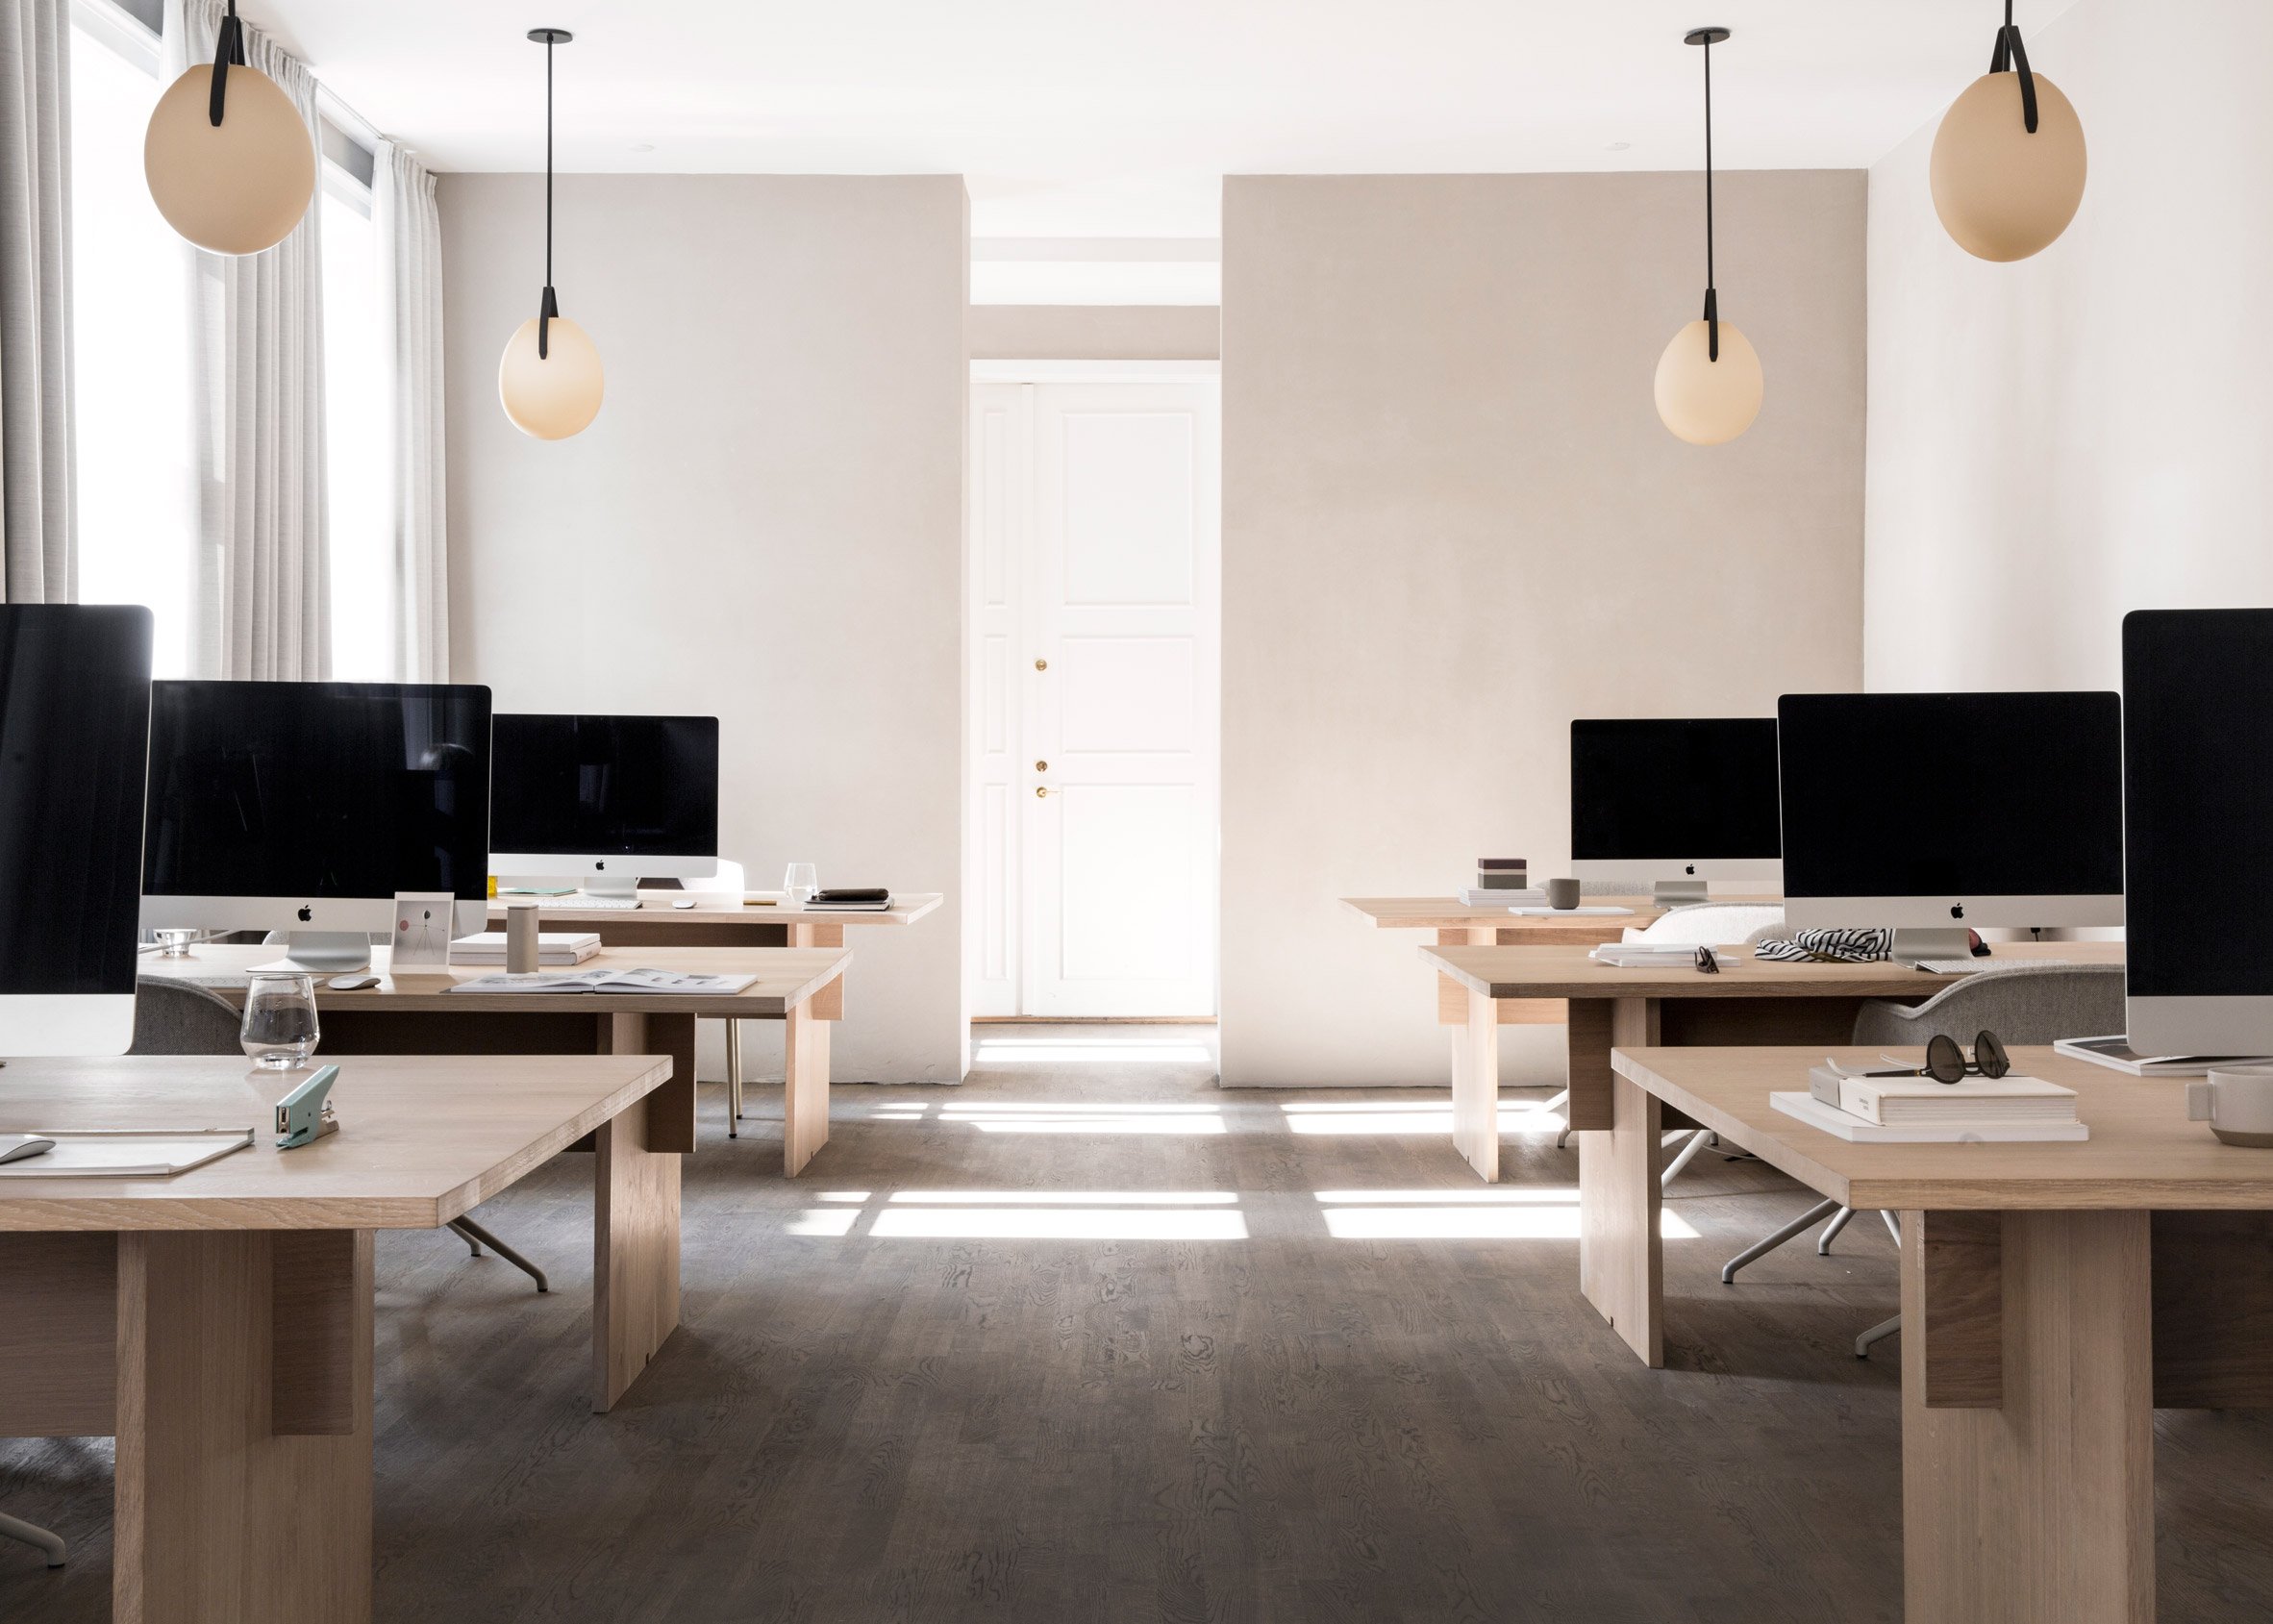 12 of the best minimalist office interiors where there's space to think